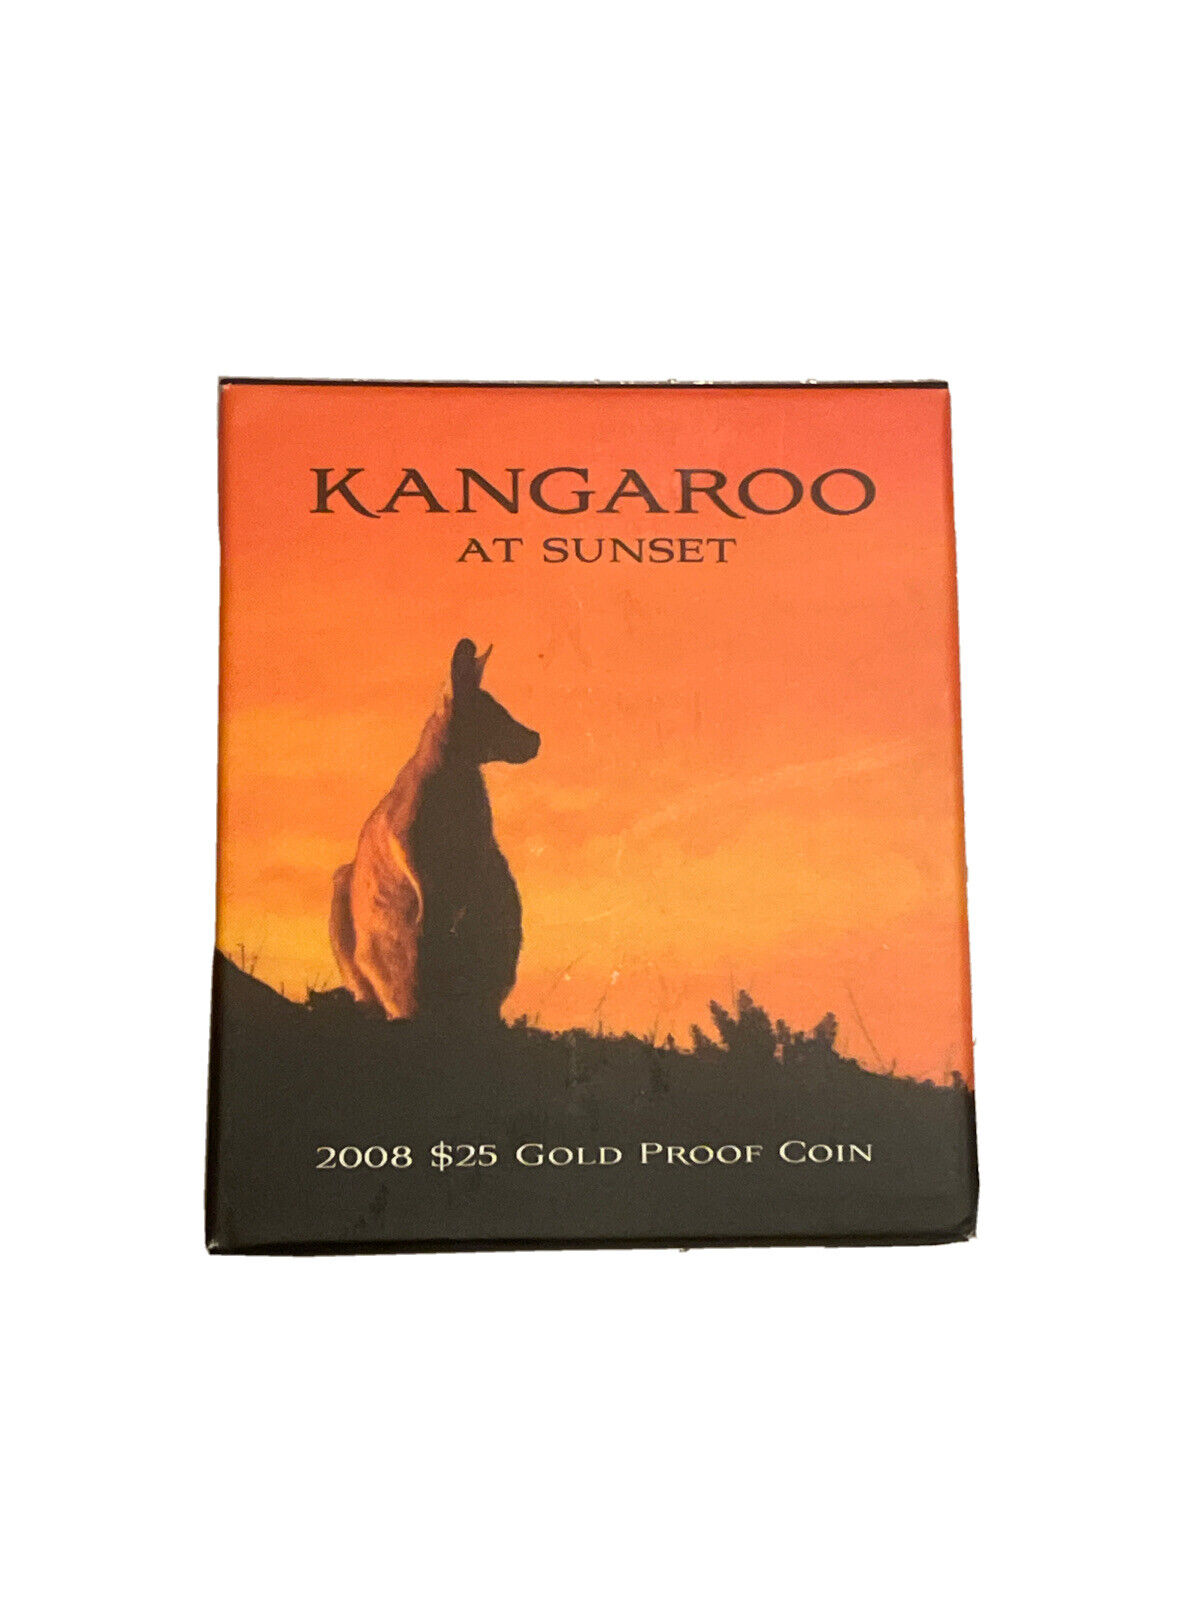 Thumbnail for 2008 One Fifth oz Kangaroo at Sunset Proof coin in Capsule 